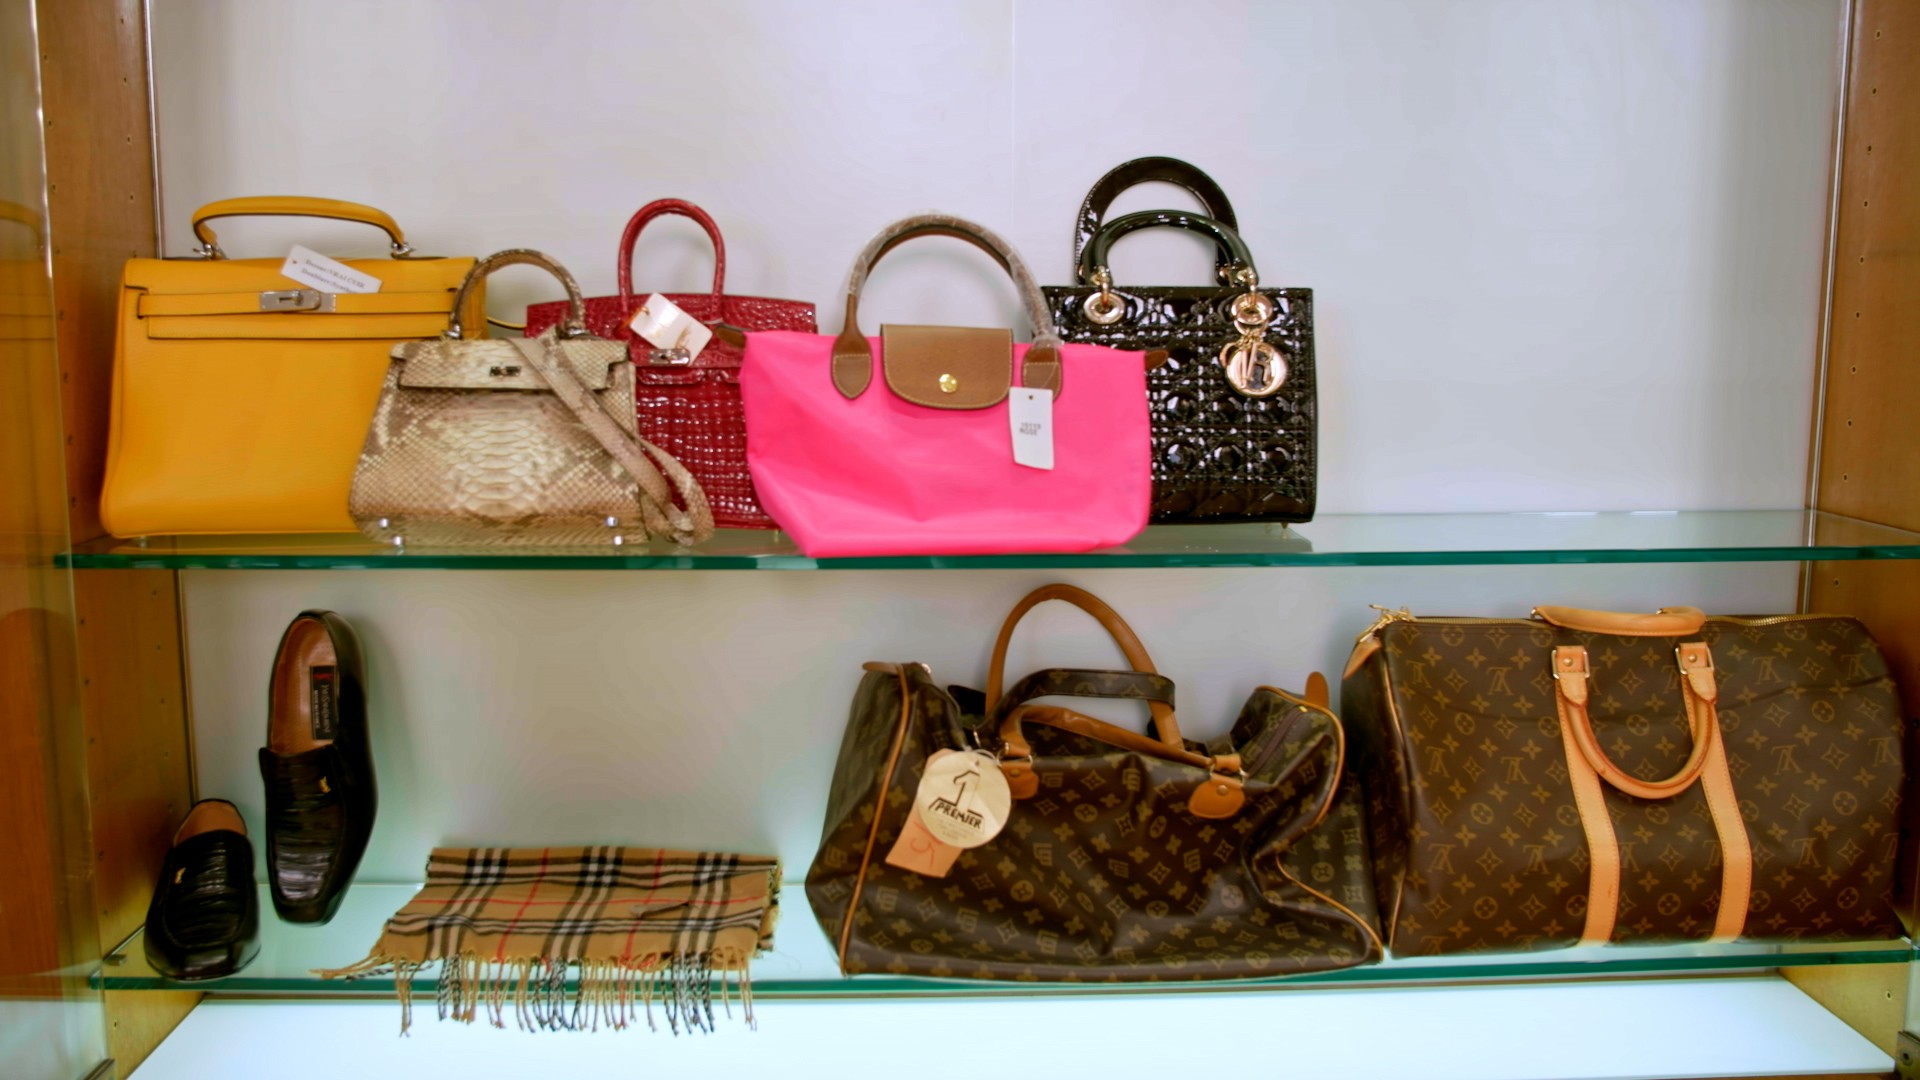 An Undercover Look at the Billion-Dollar Fake Goods Market of